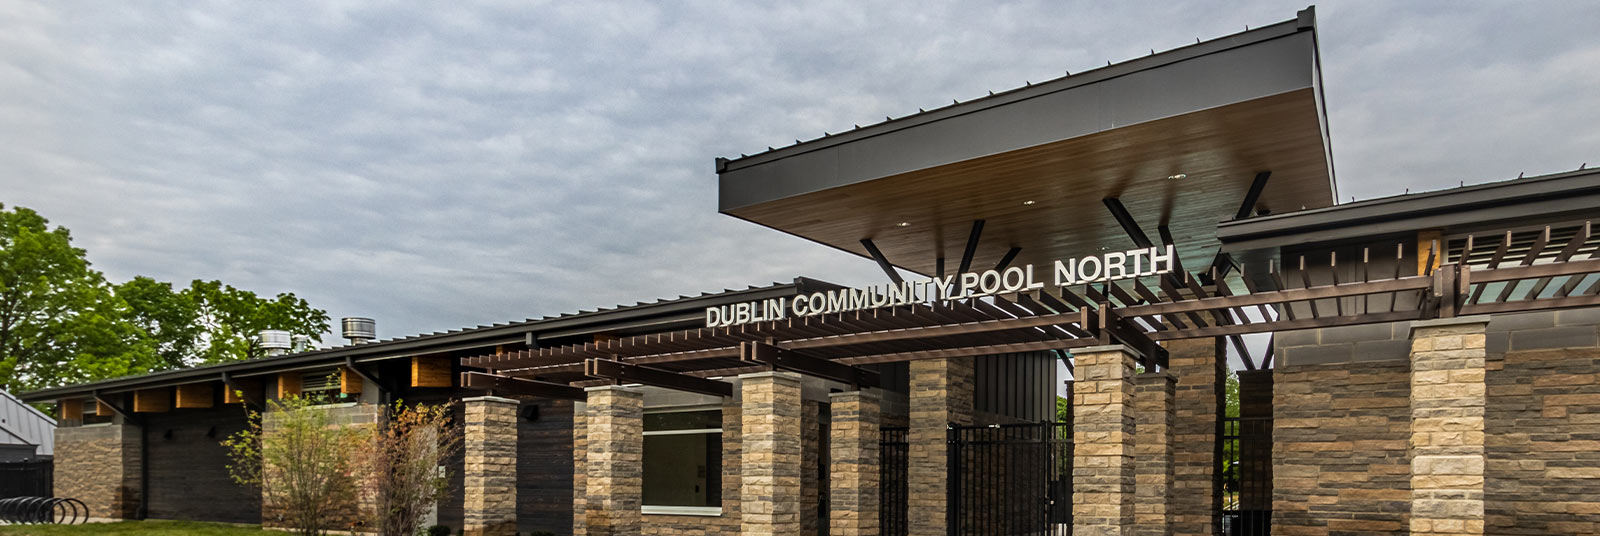 The gated entrance to the new Dublin Community Pool North.